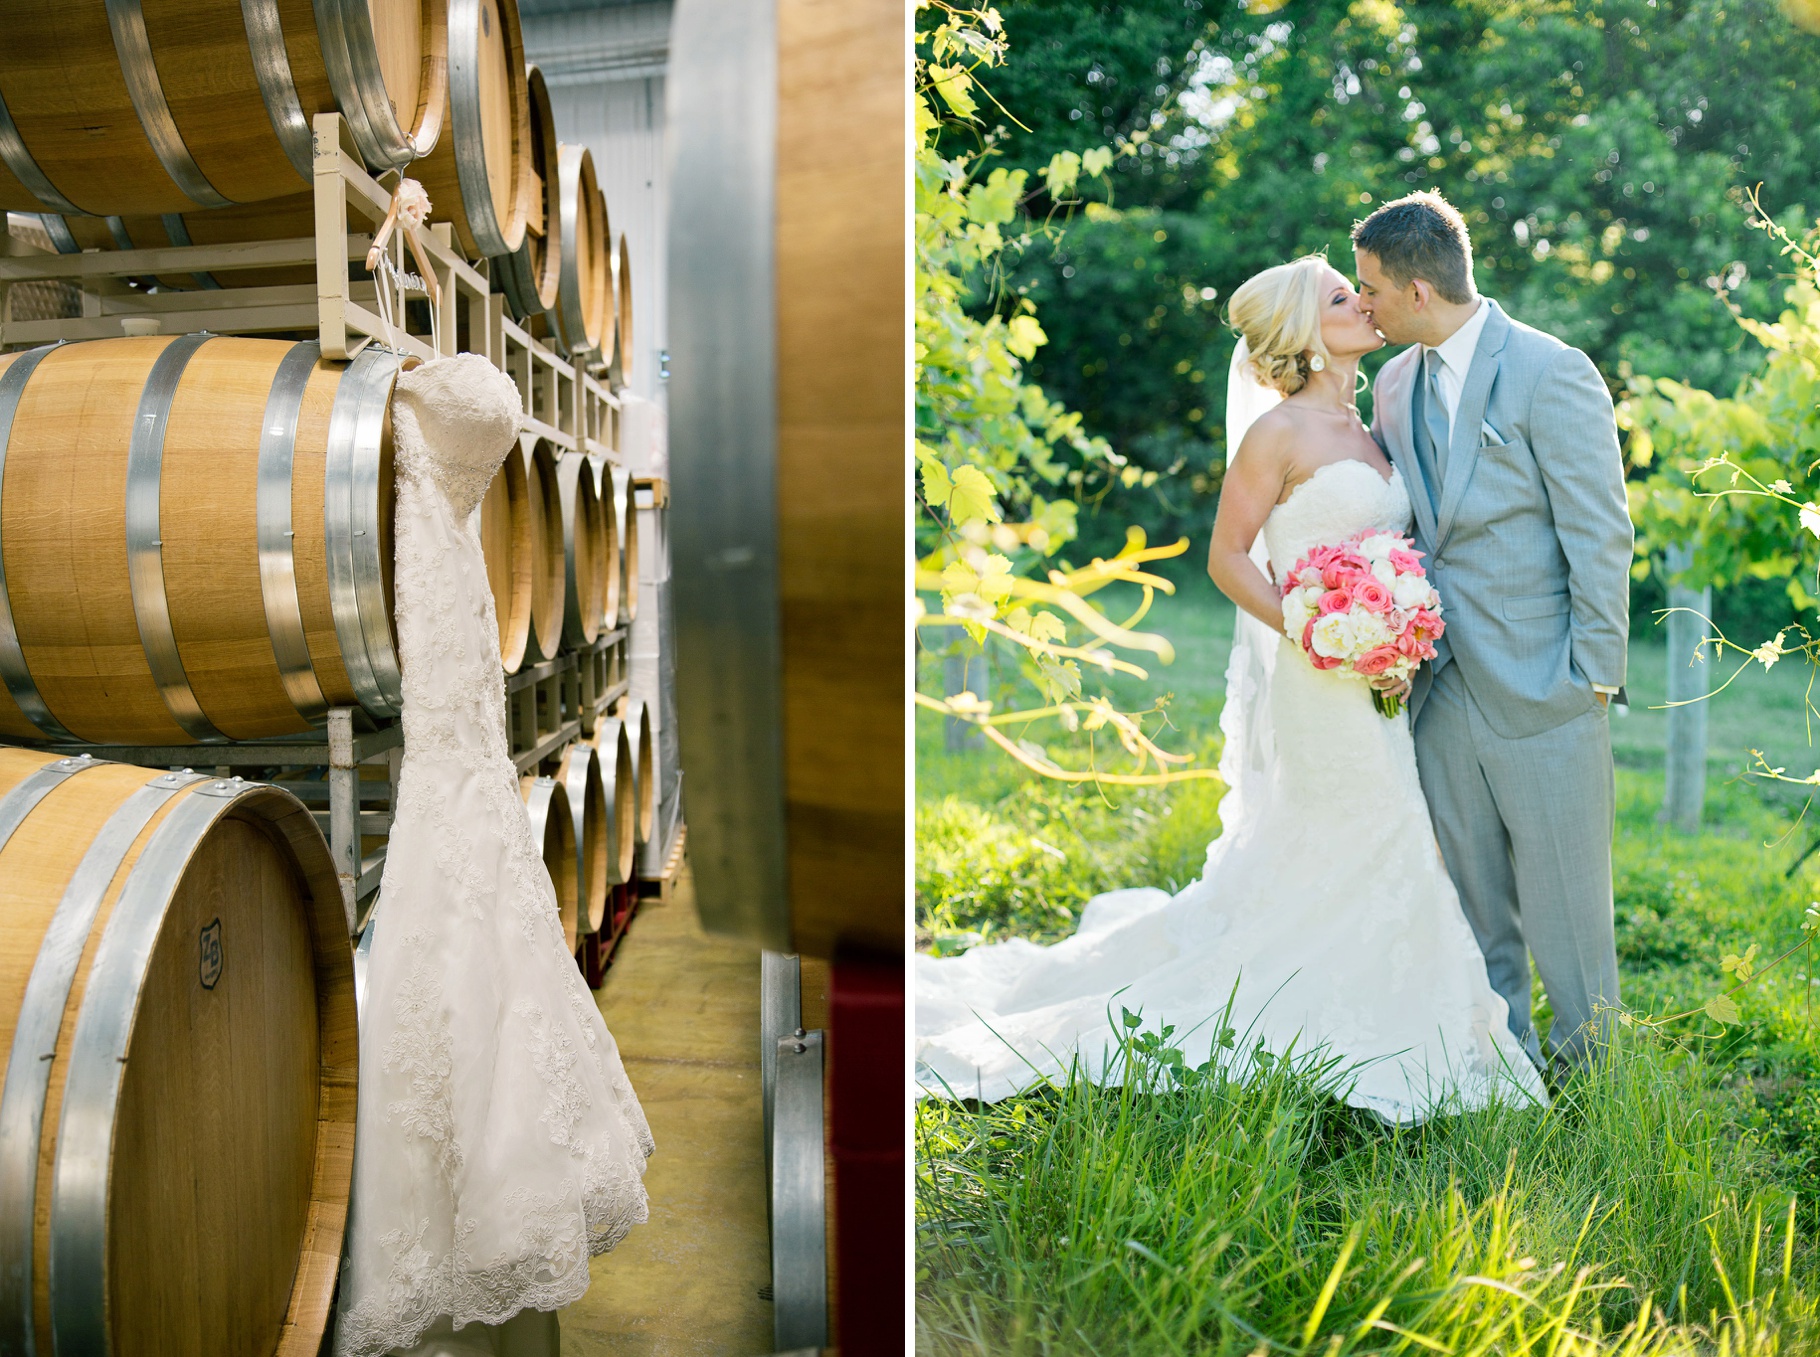 9-Vineyard-Winery-Cellars-Bride-Groom-Bridal-Gown-Snohomish-Photographer-Seattle-Wedding-Photography-by-Betty-Elaine